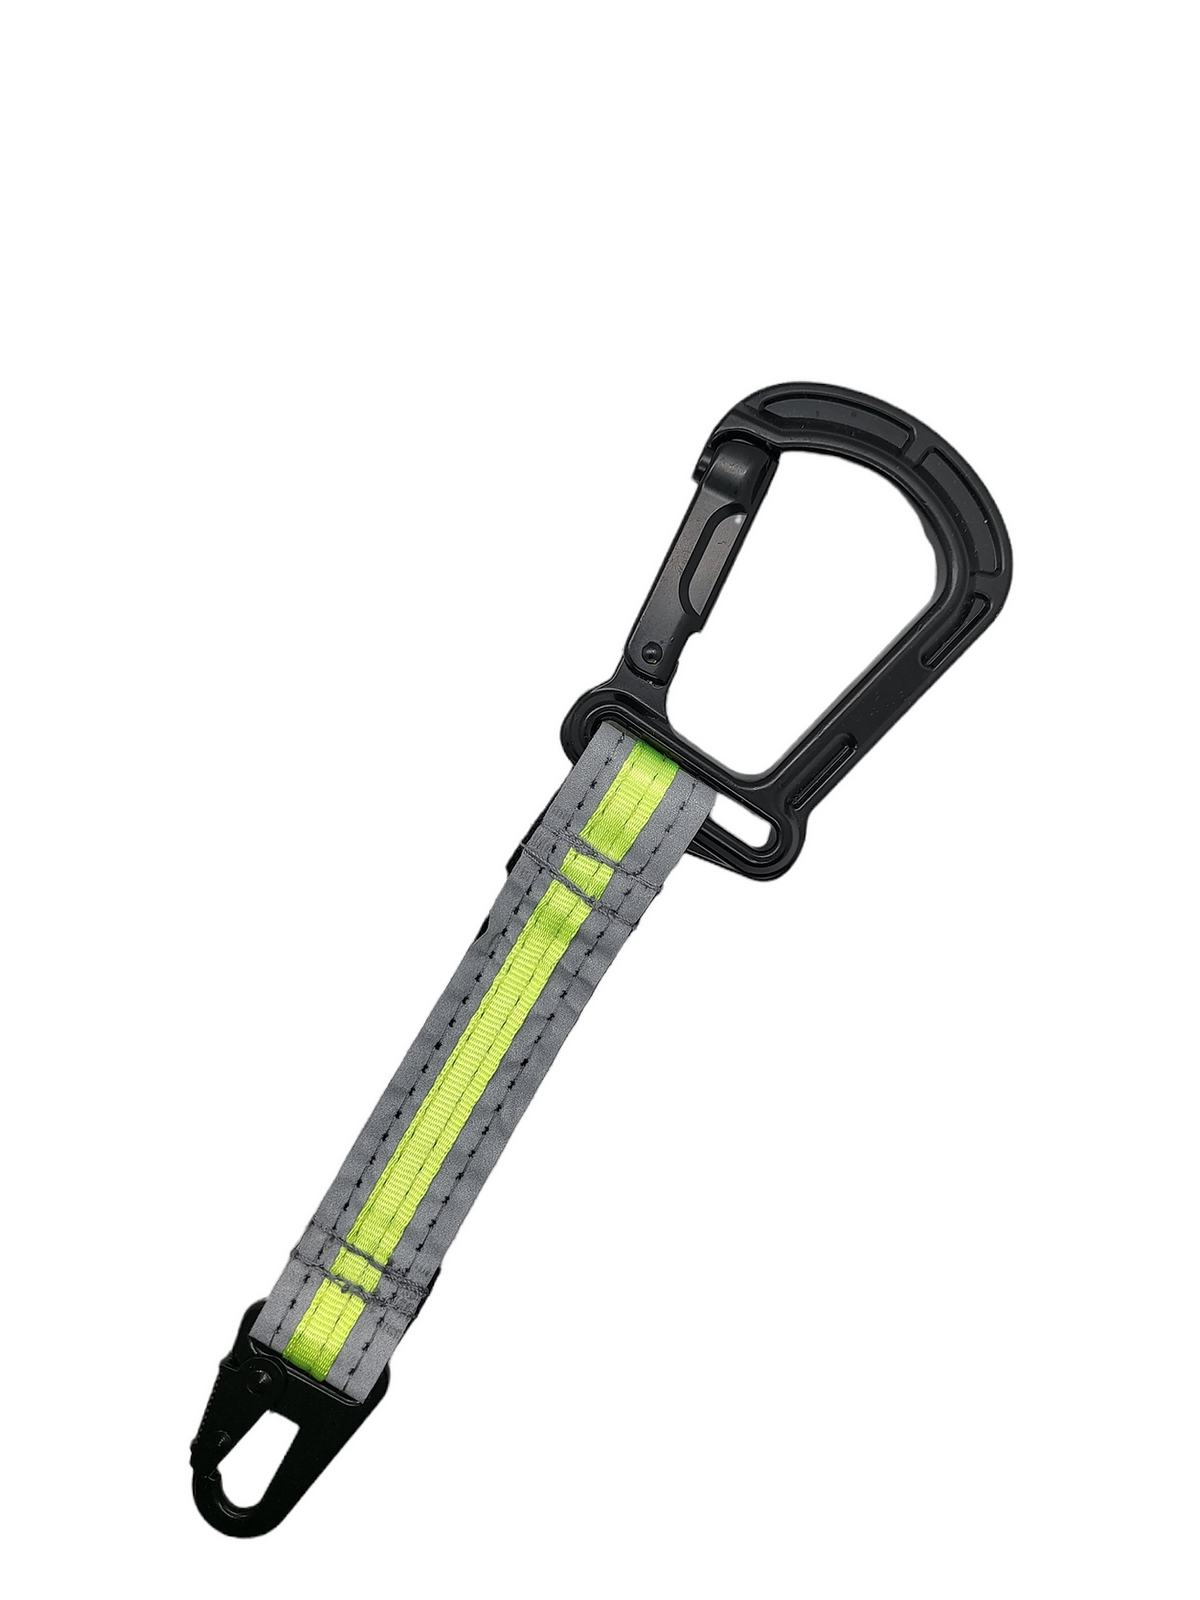 SGT Fire Anti-Sway Carabiner Keeper